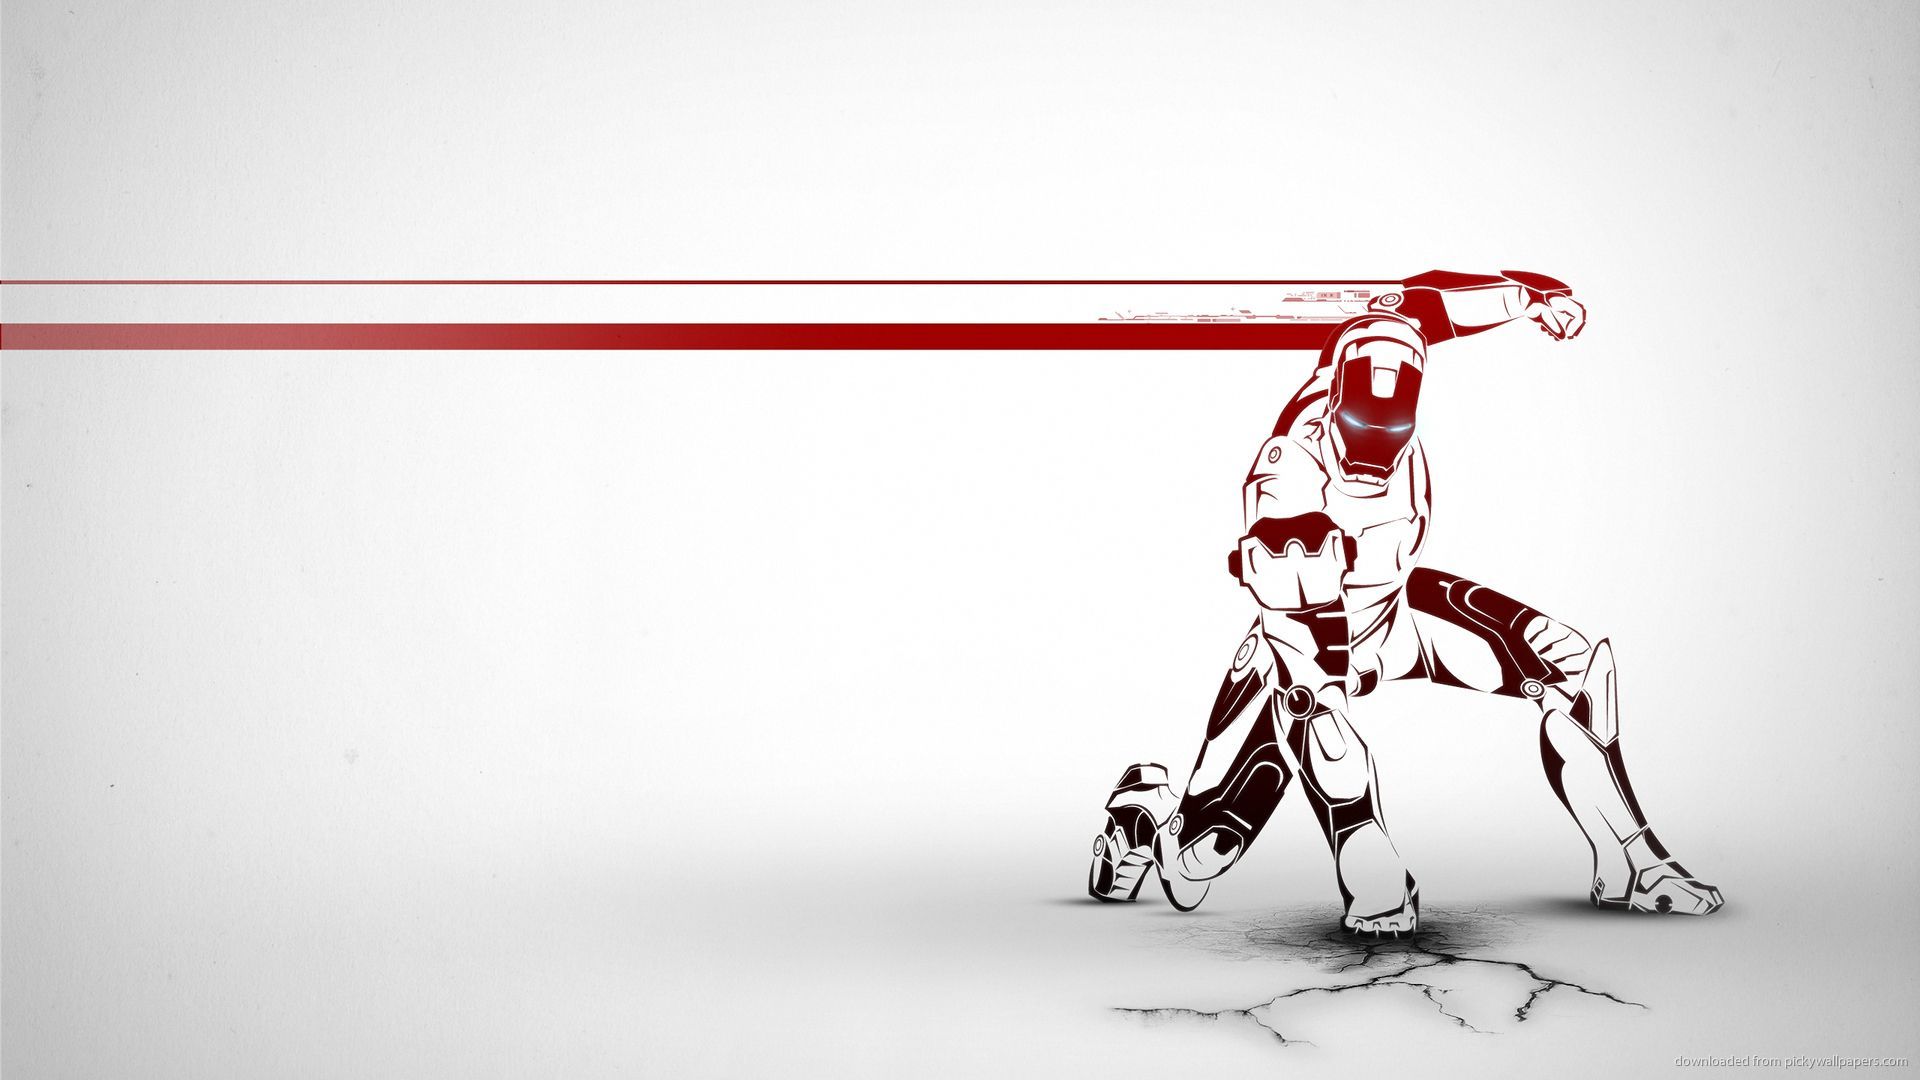 Download 1920x1080 Iron Man Awesome Red Art Wallpaper